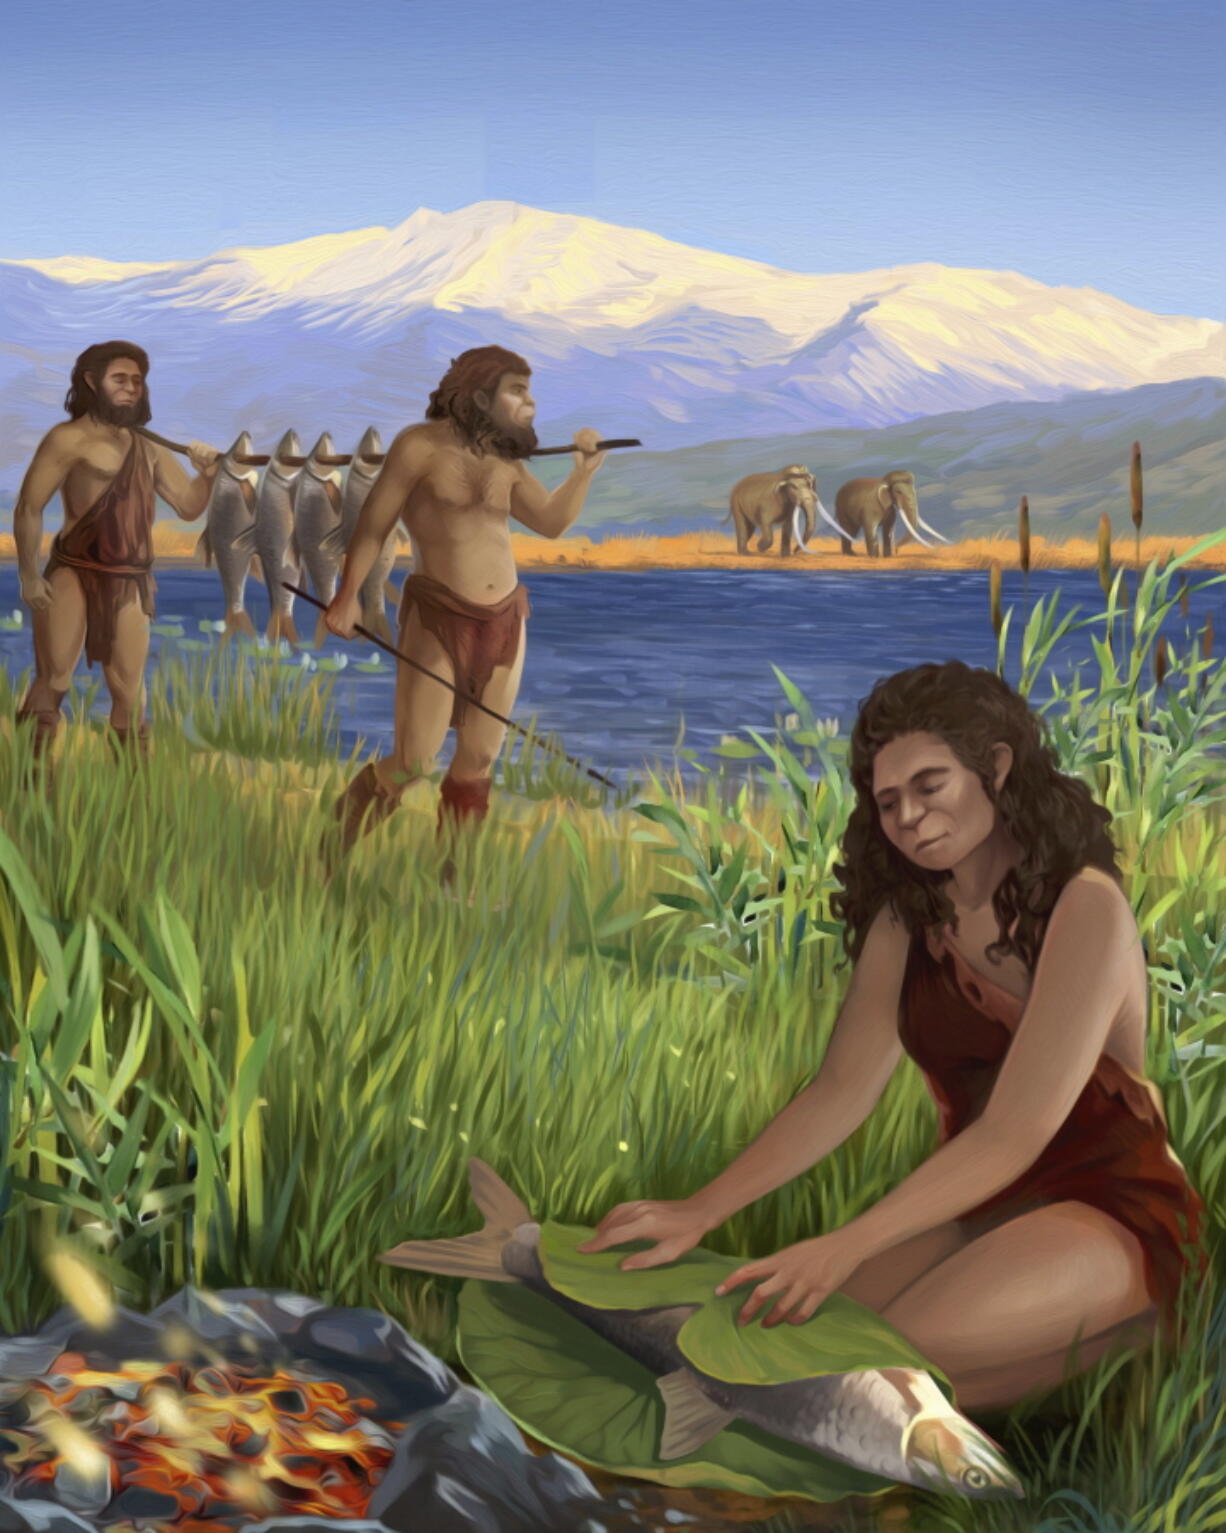 This illustration provided by Tel Aviv University depicts hominins preparing Luciobarbus longiceps fish on the shores of the ancient lake Lake Hula. A recent study found the oldest evidence of using fire to cook, dating back to 780,000 years ago.